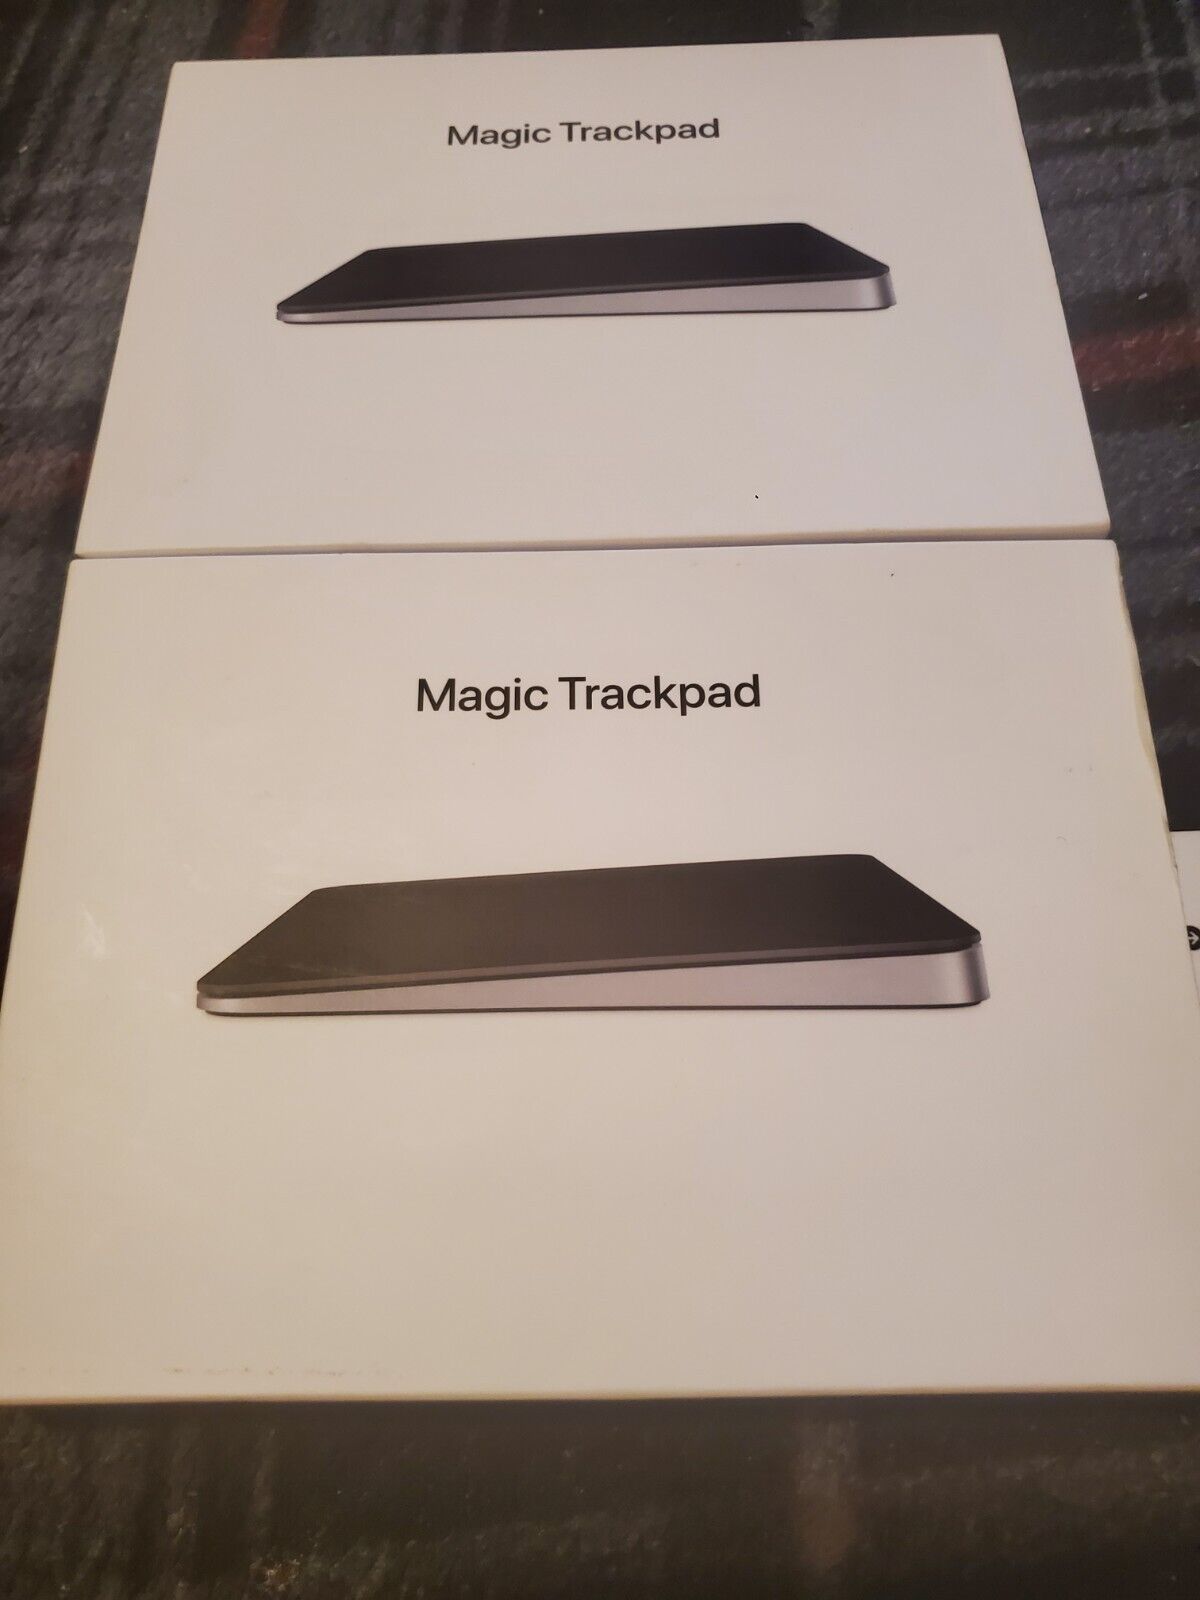 BRAND NEW GENUINE Apple Magic Trackpad - Black Multi-Touch Surface For One Only.